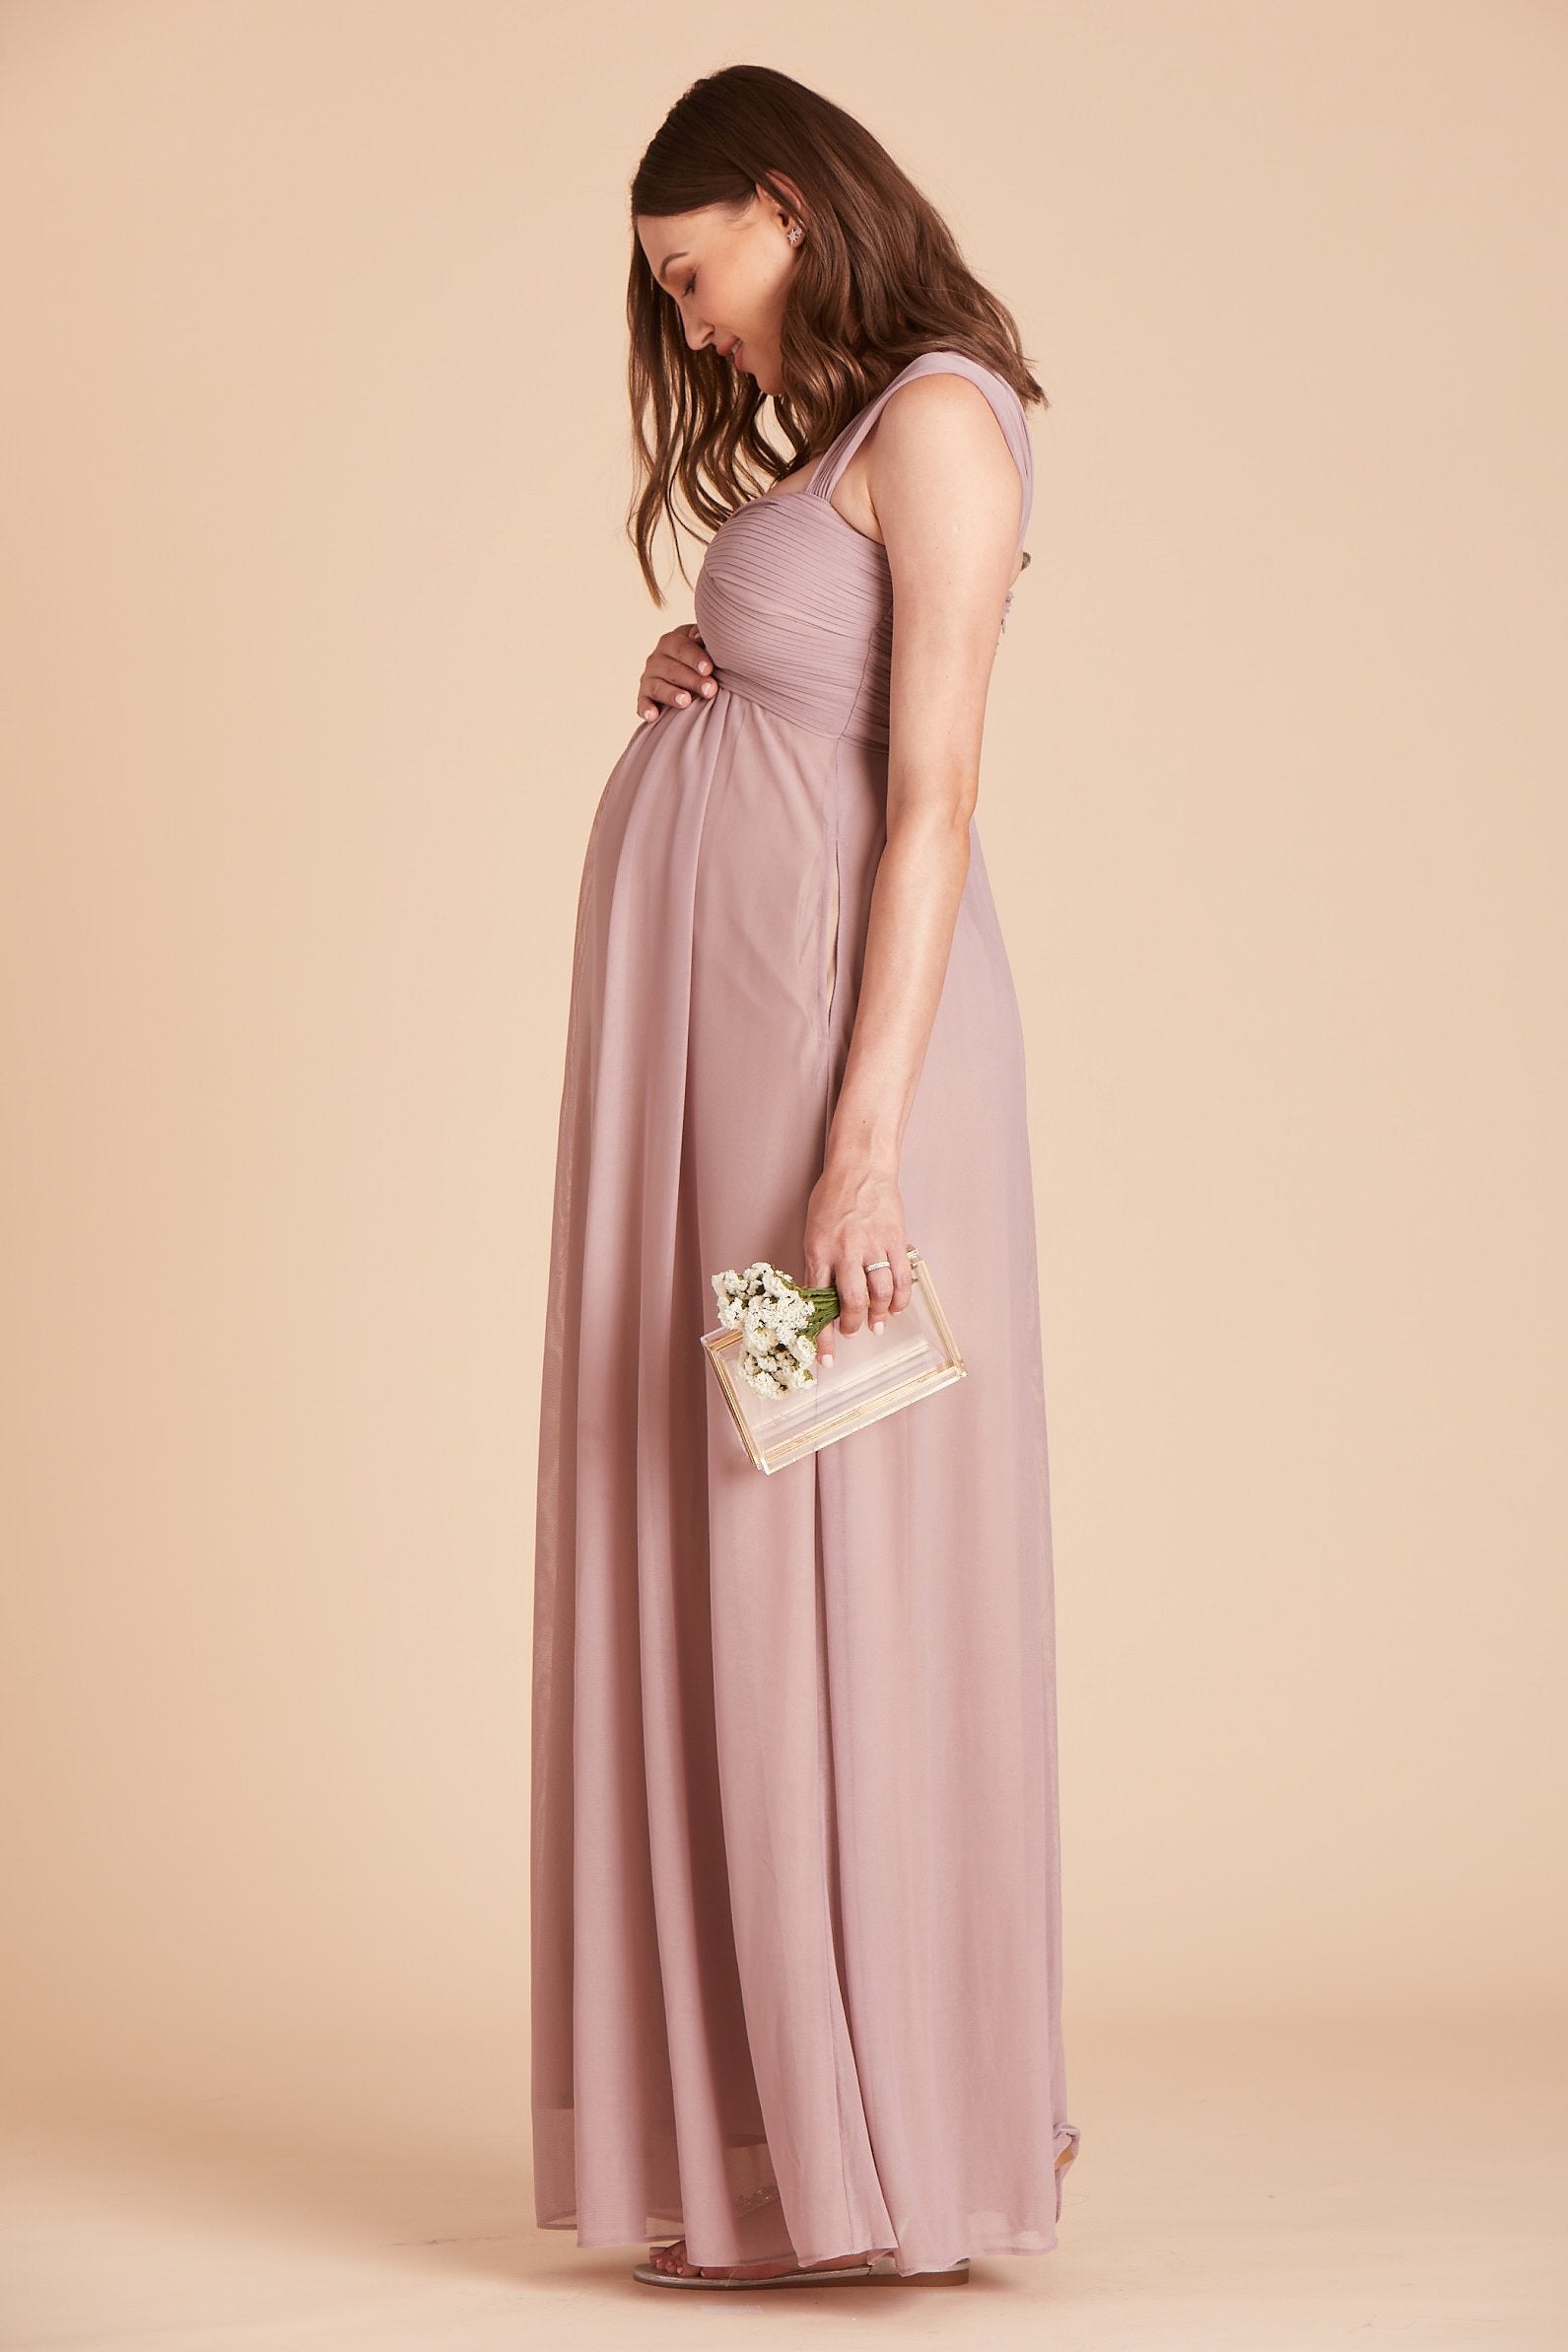 Maria convertible bridesmaids dress in mauve chiffon by Birdy Grey, side view